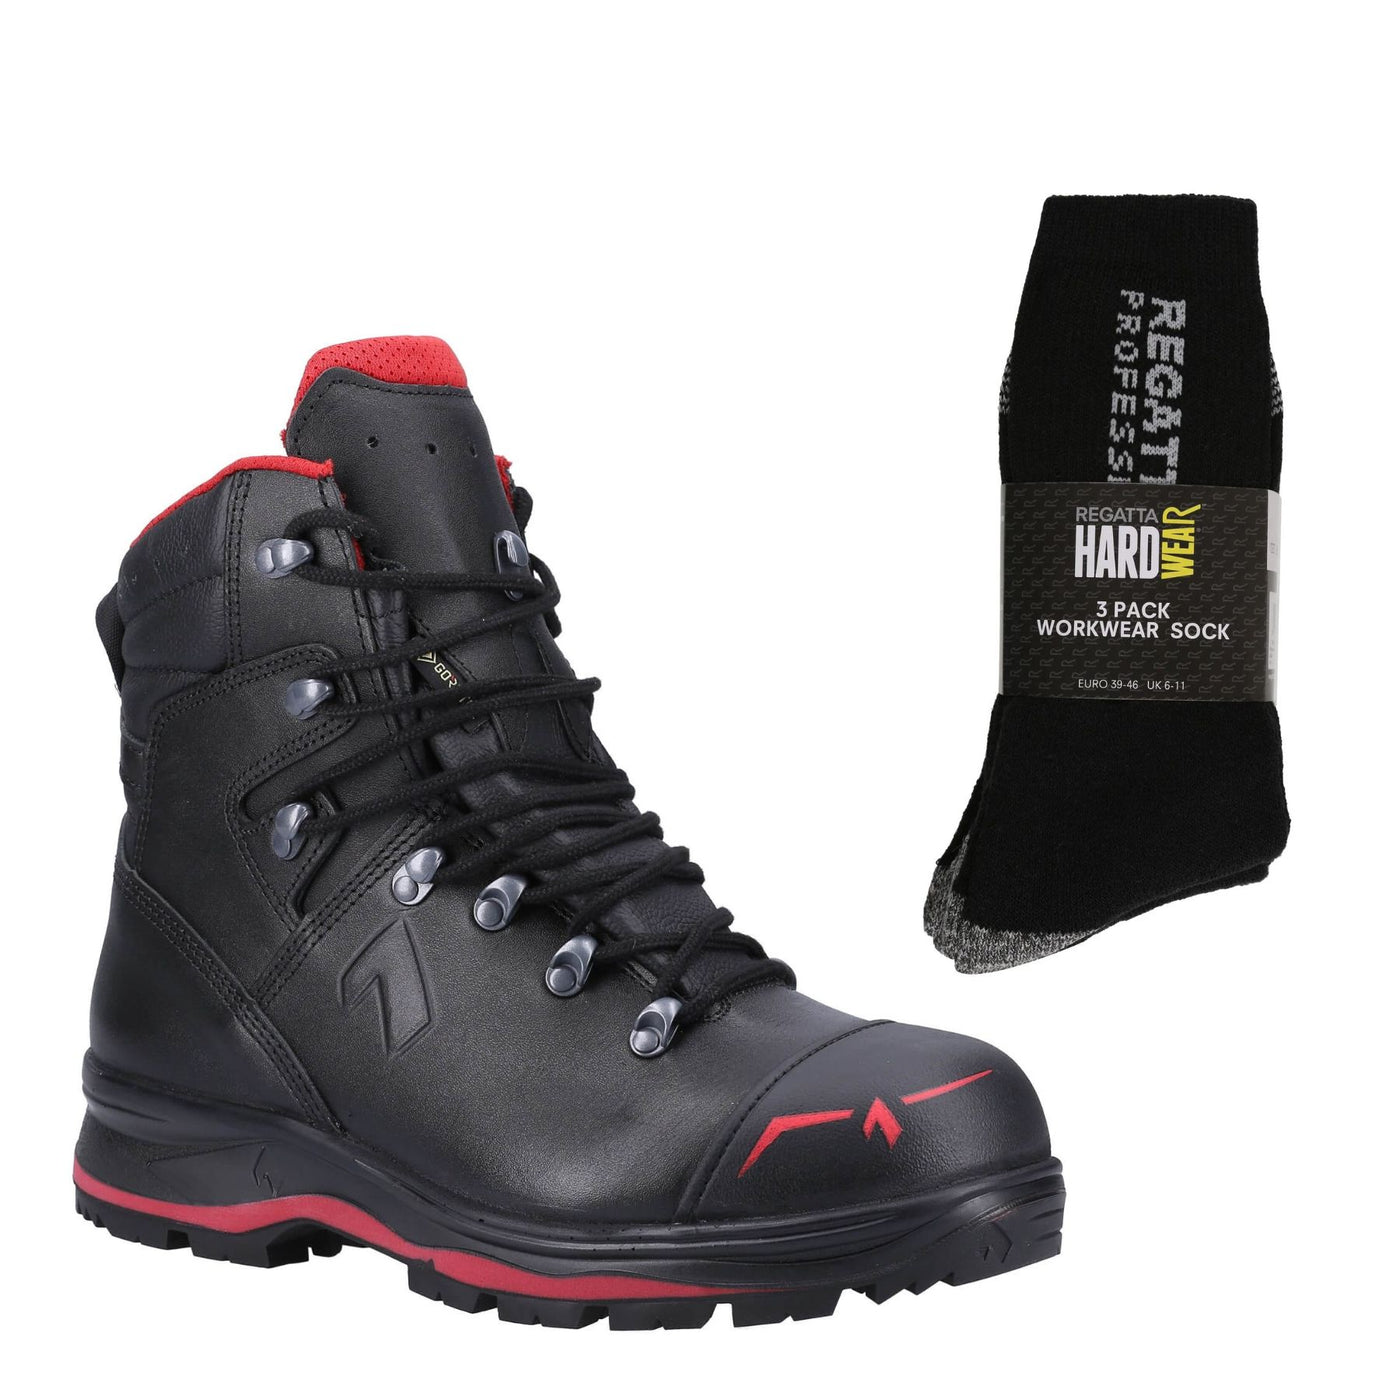 Haix Trekker Pro 2.0 Special Offer Pack - Safety Boots + 3 Pairs Work Socks